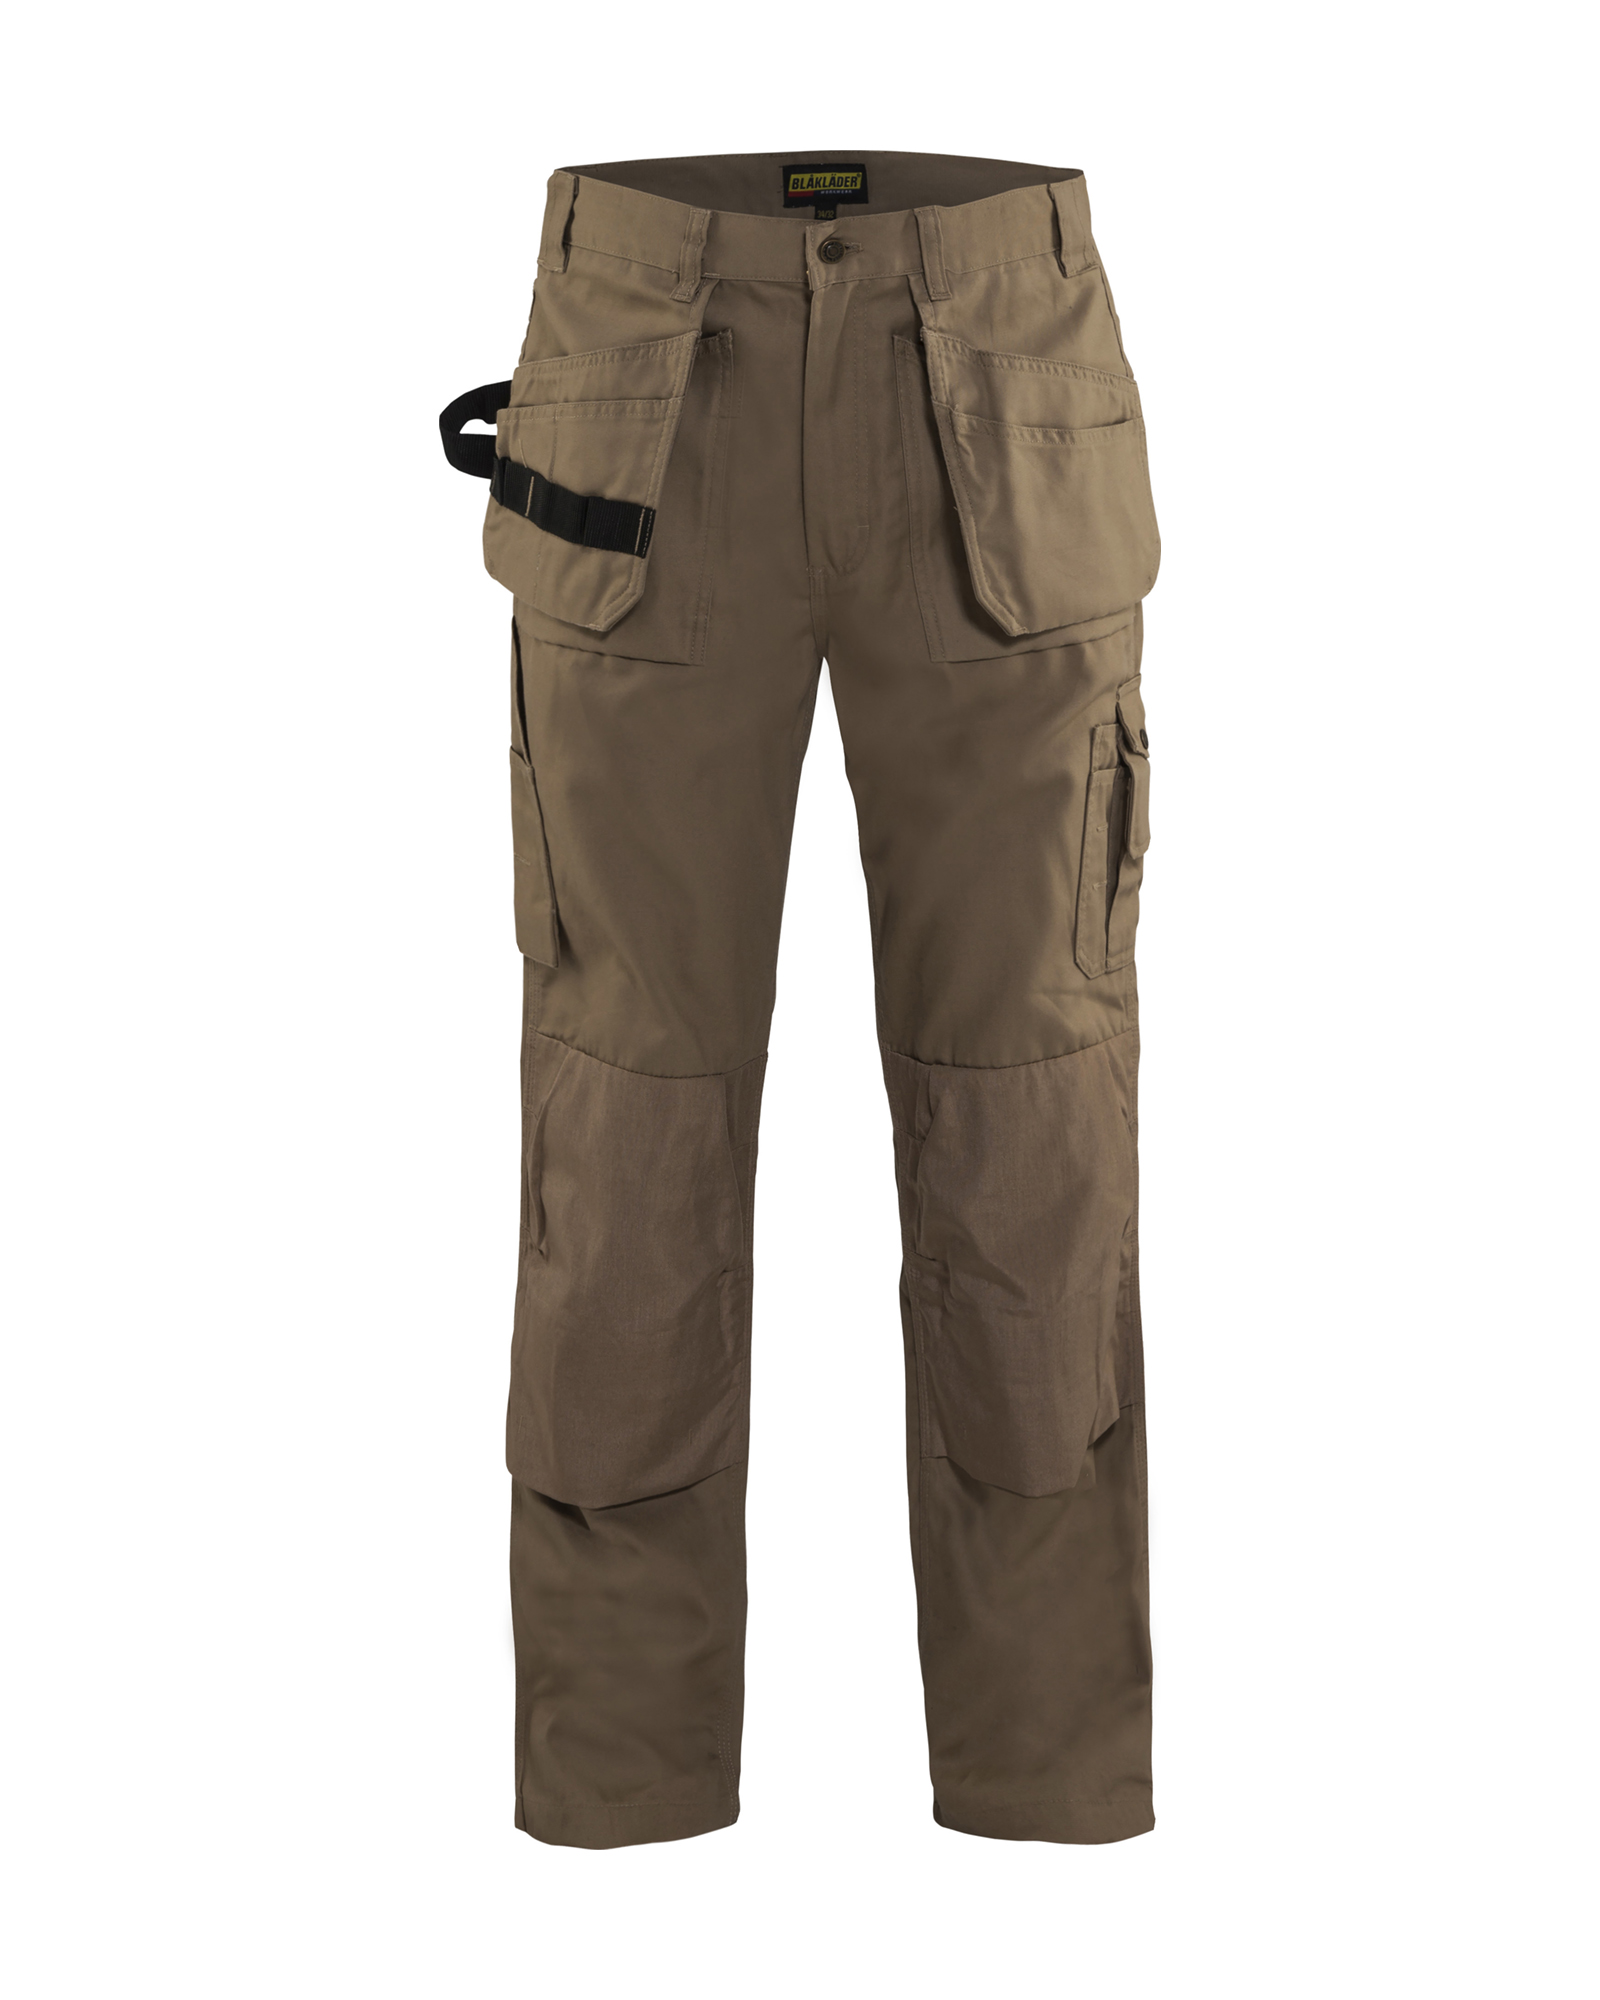 Blaklader Work Pants  Construction Work Pants  Construction Clothes   Northern Boots